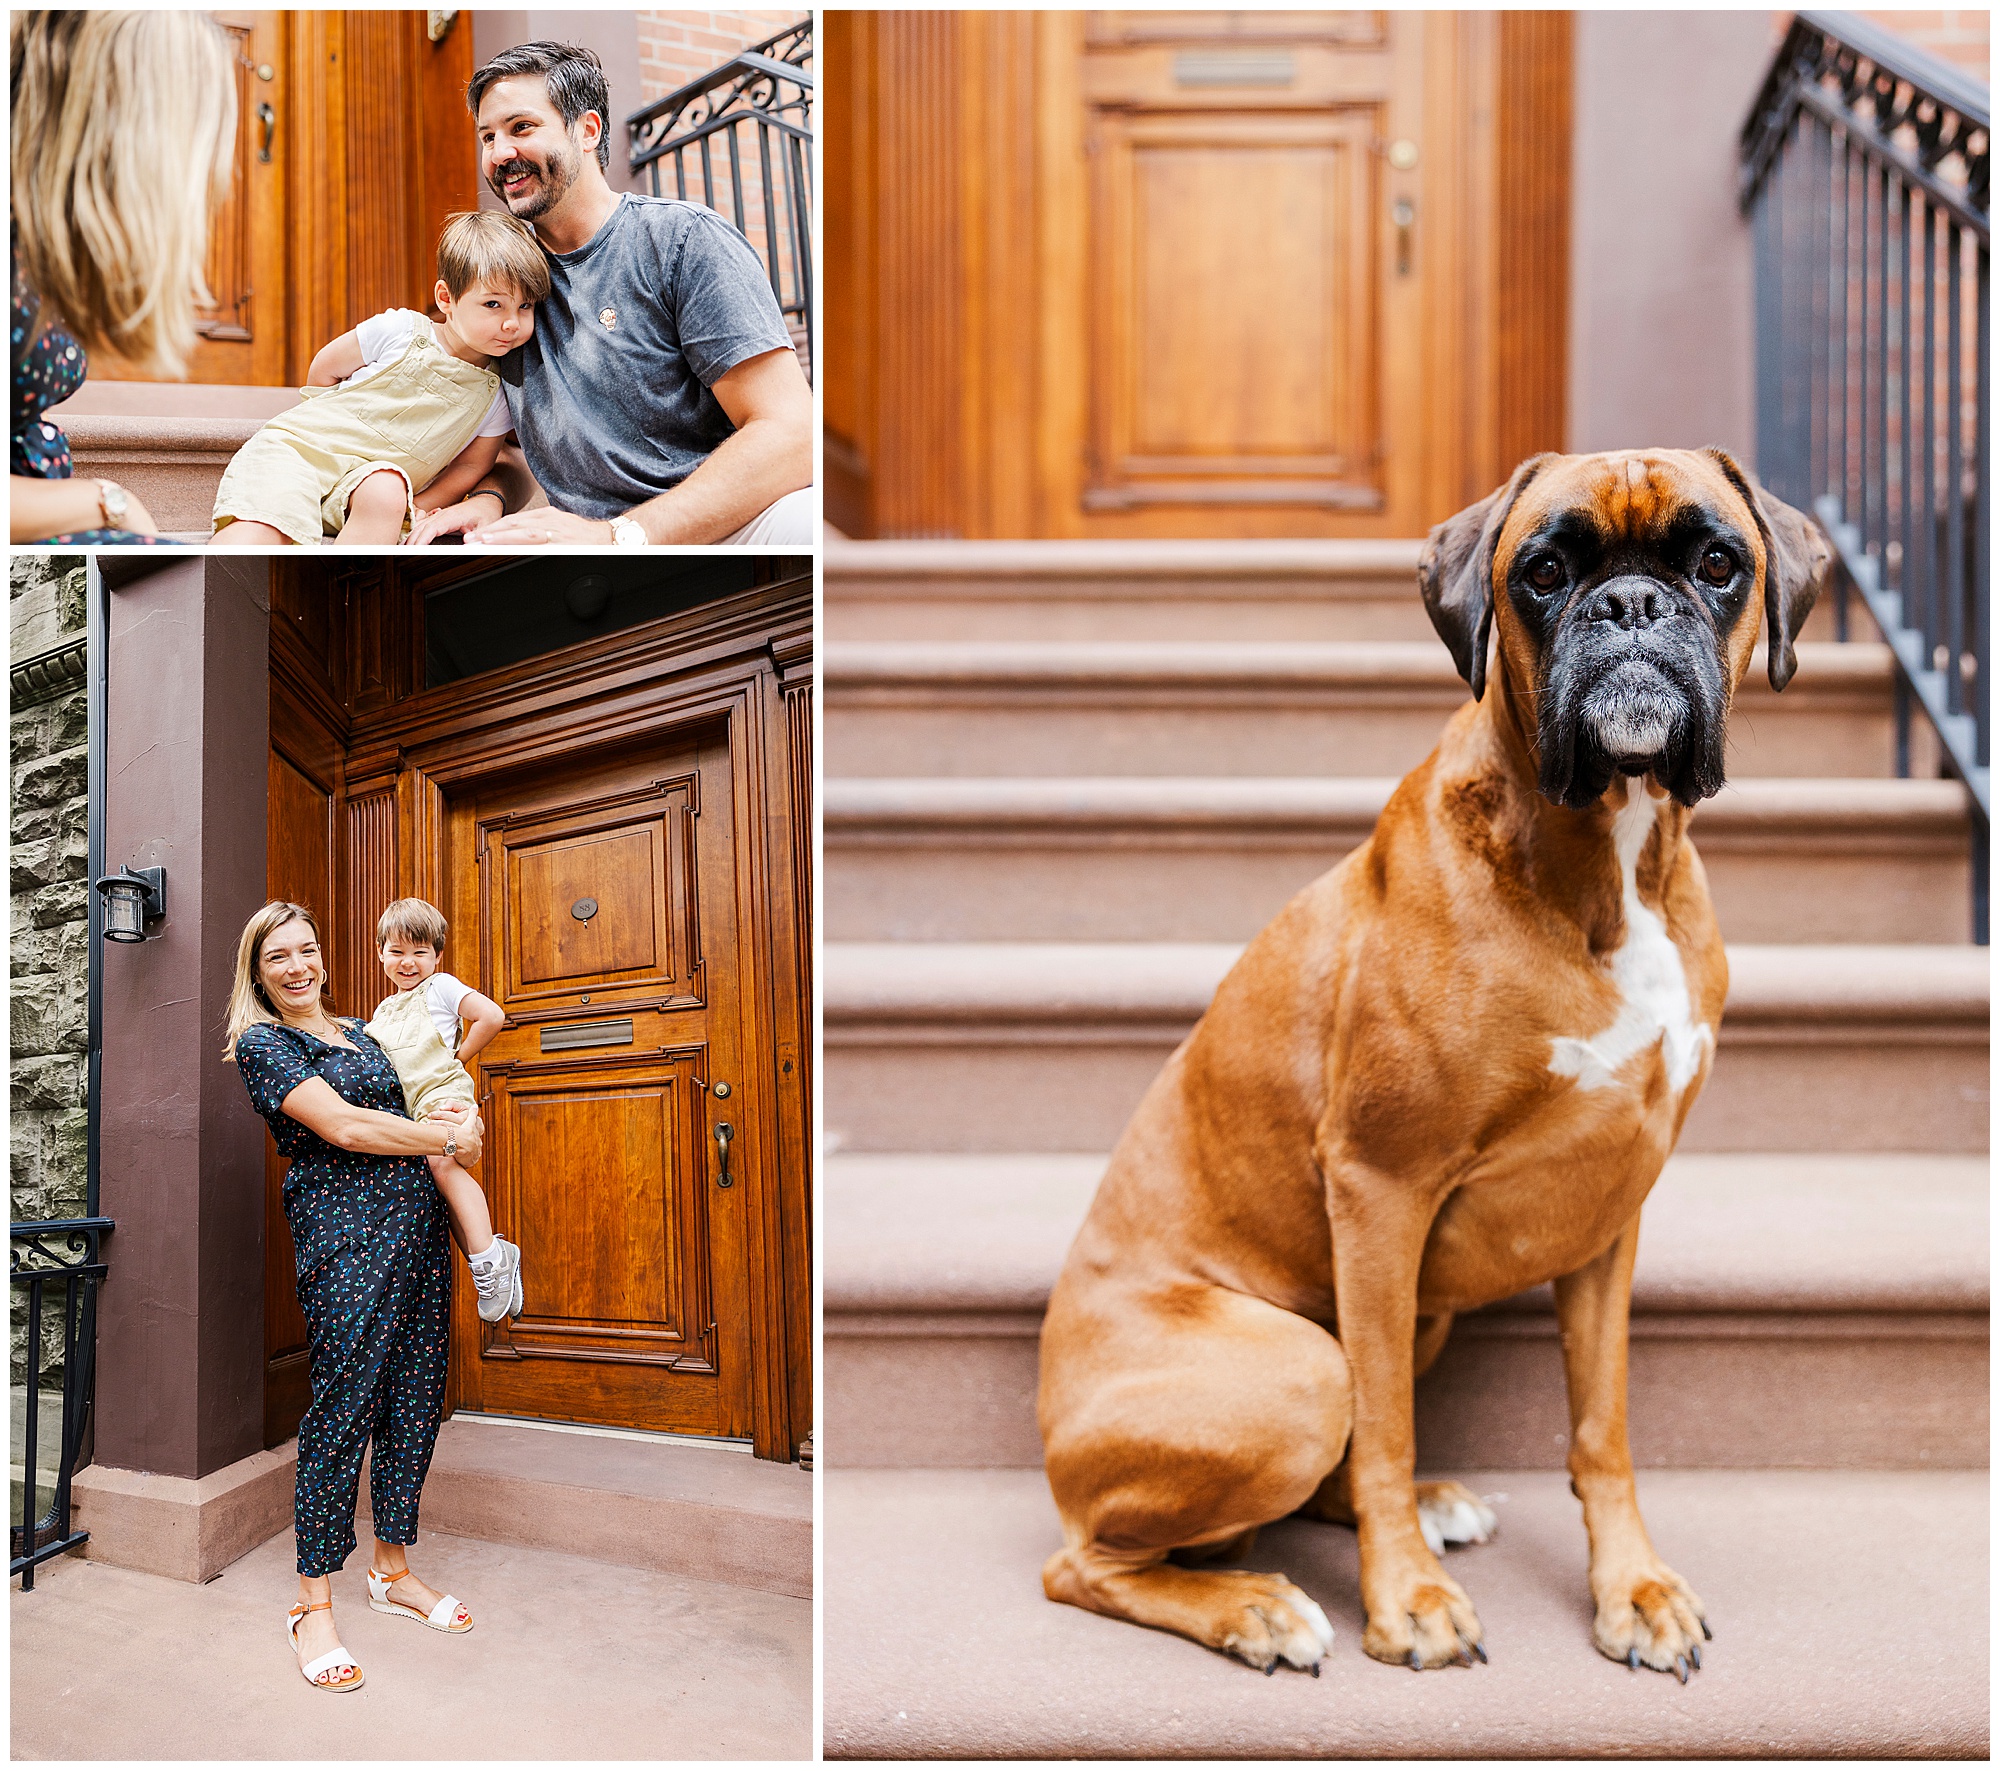 Natural family photo shoot in Brooklyn Heights